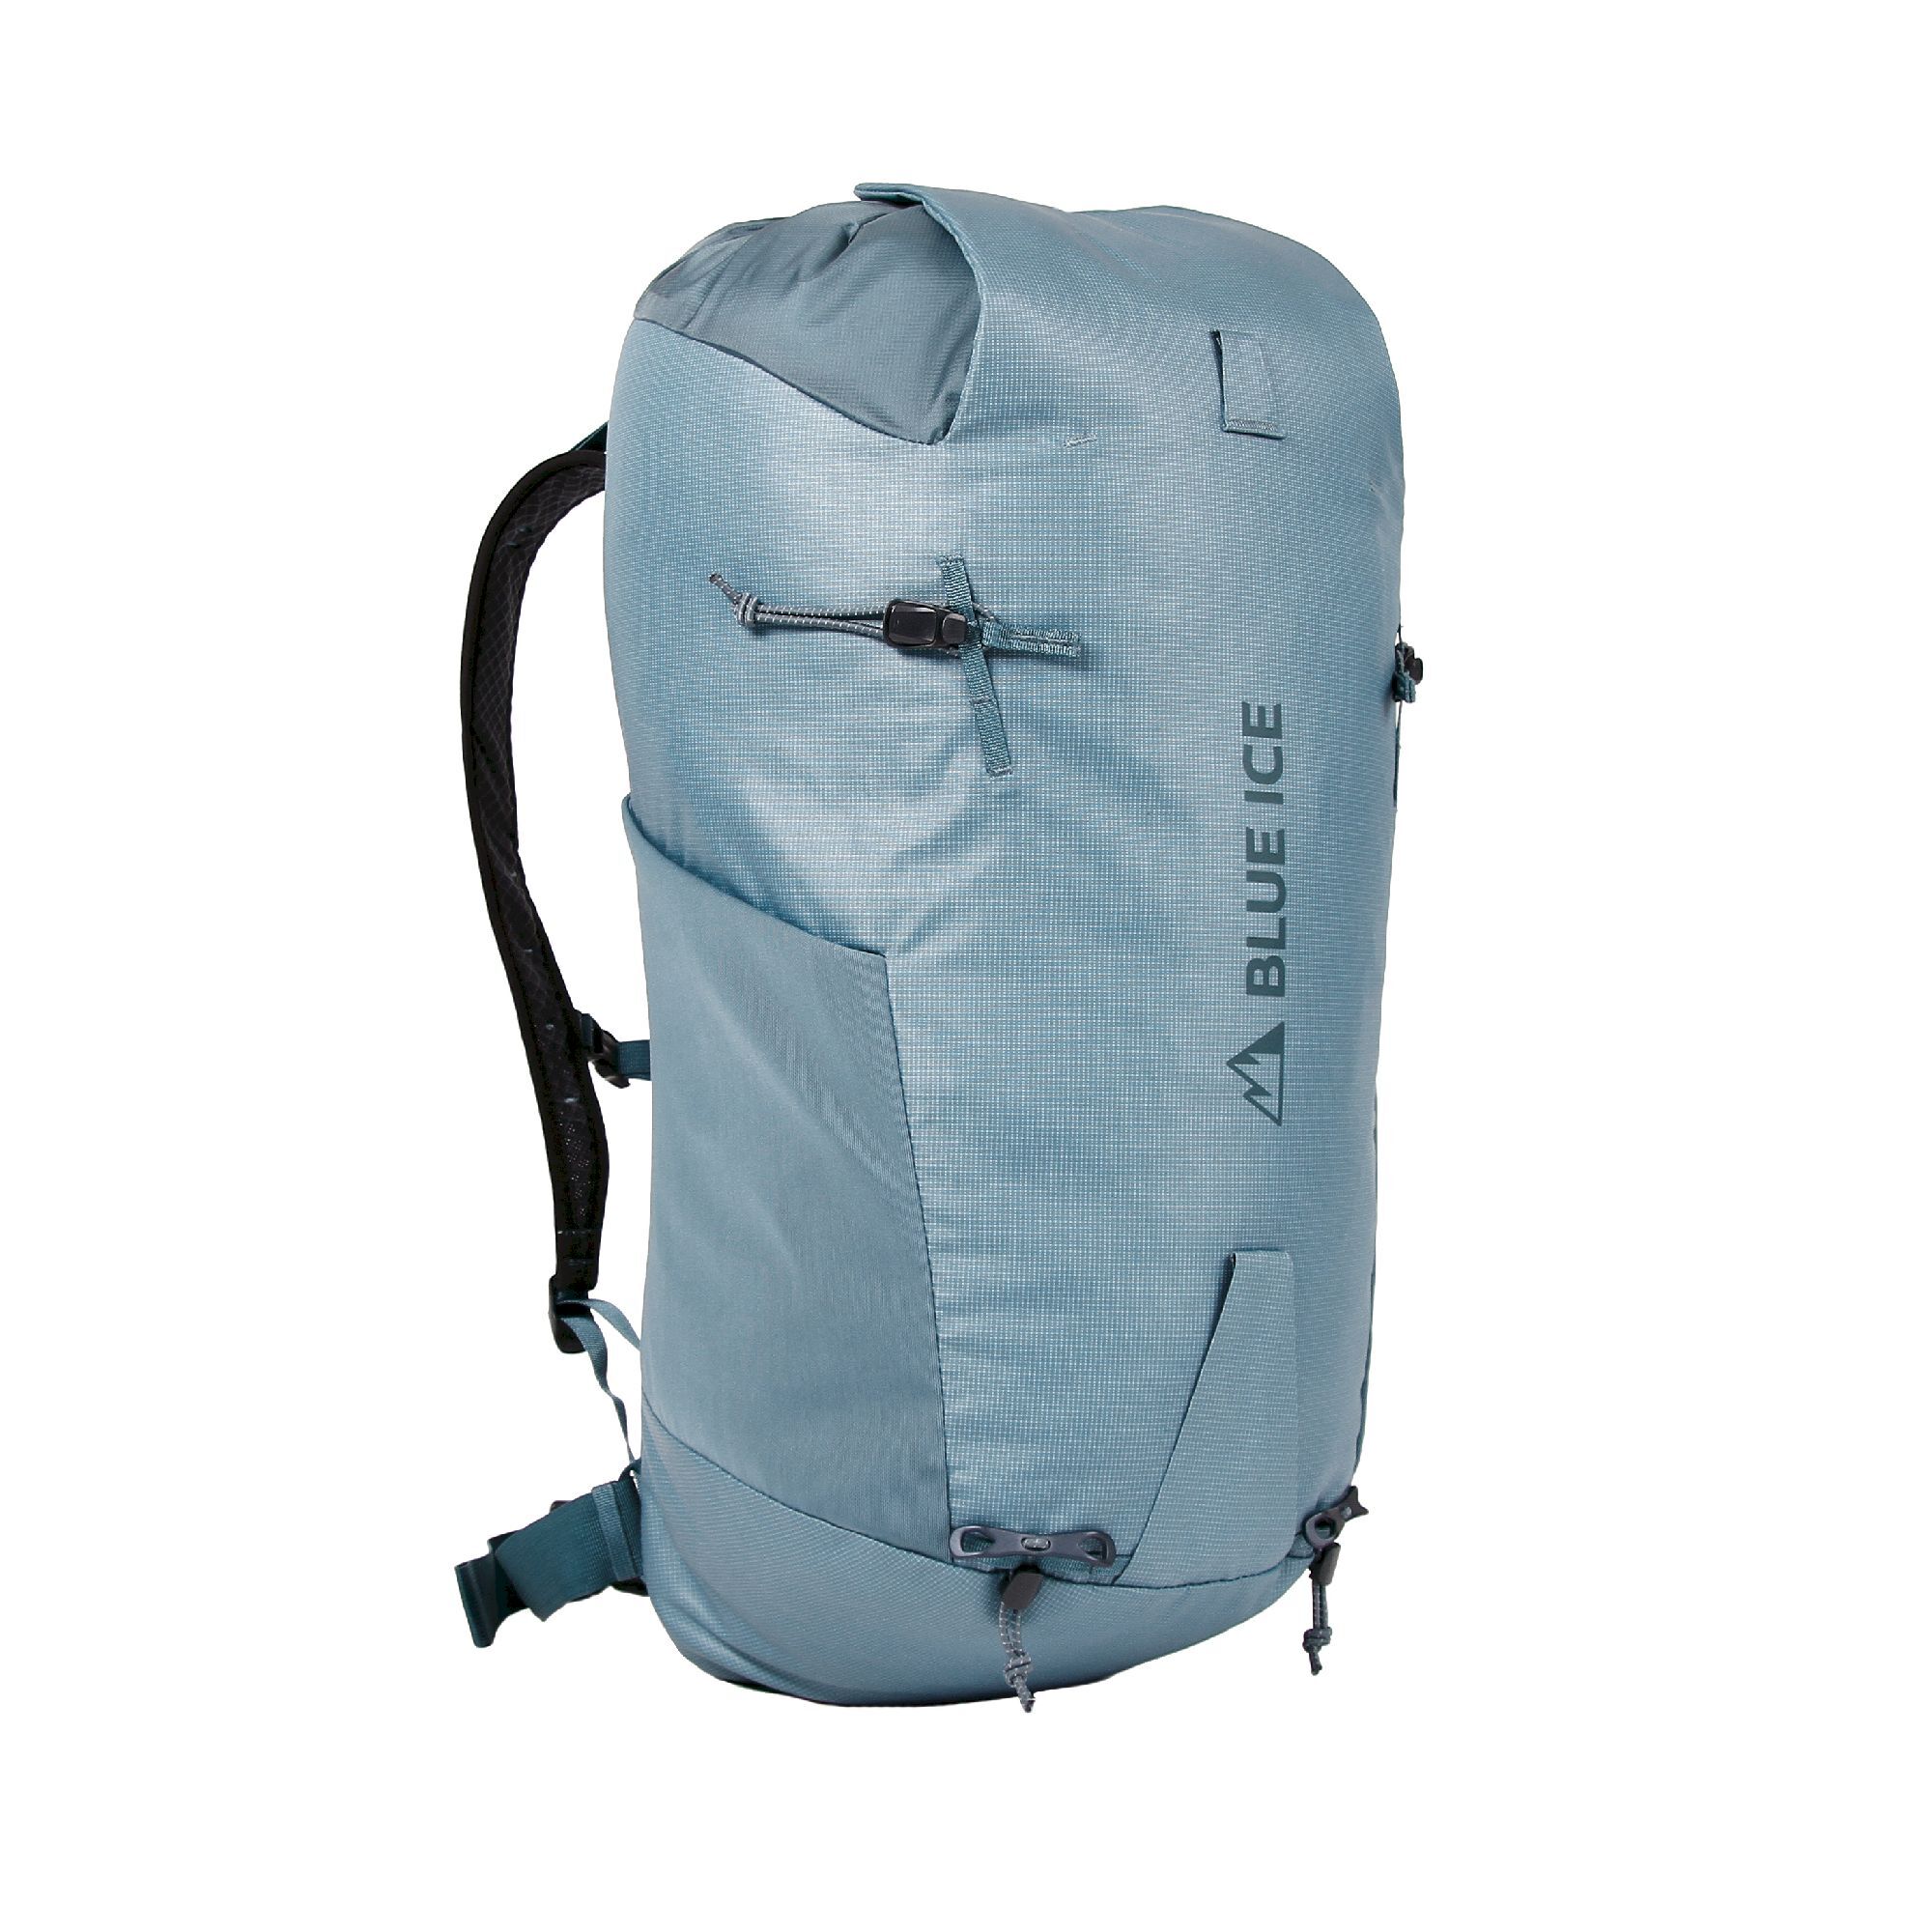 https://images.hardloop.fr/505162/blue-ice-dragonfly-34-mountaineering-backpack.jpg?w=auto&h=auto&q=80